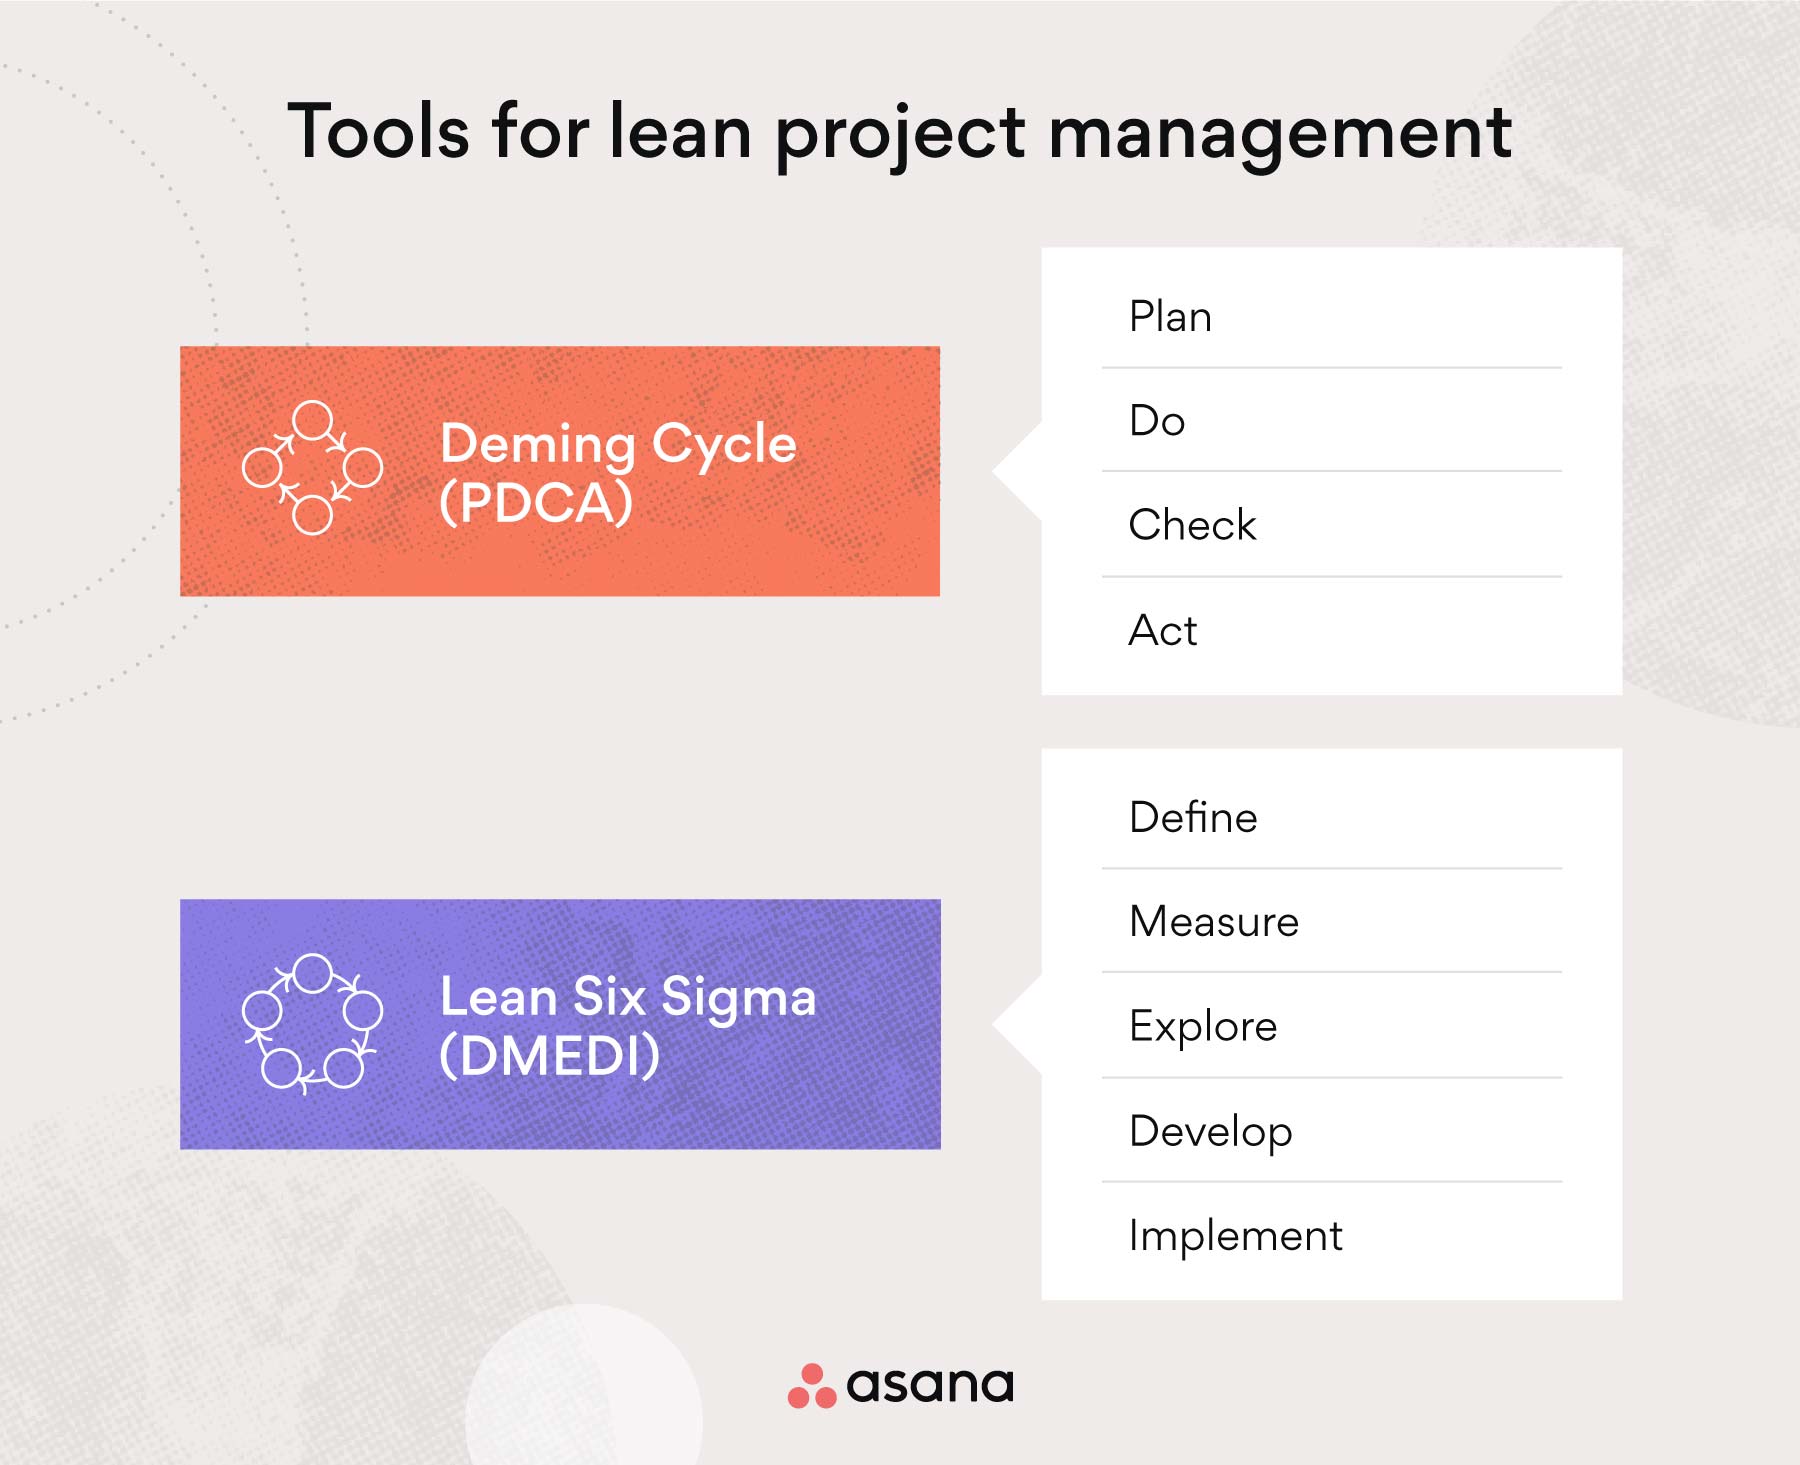 [inline illustration] Lean project management tools (infographic)